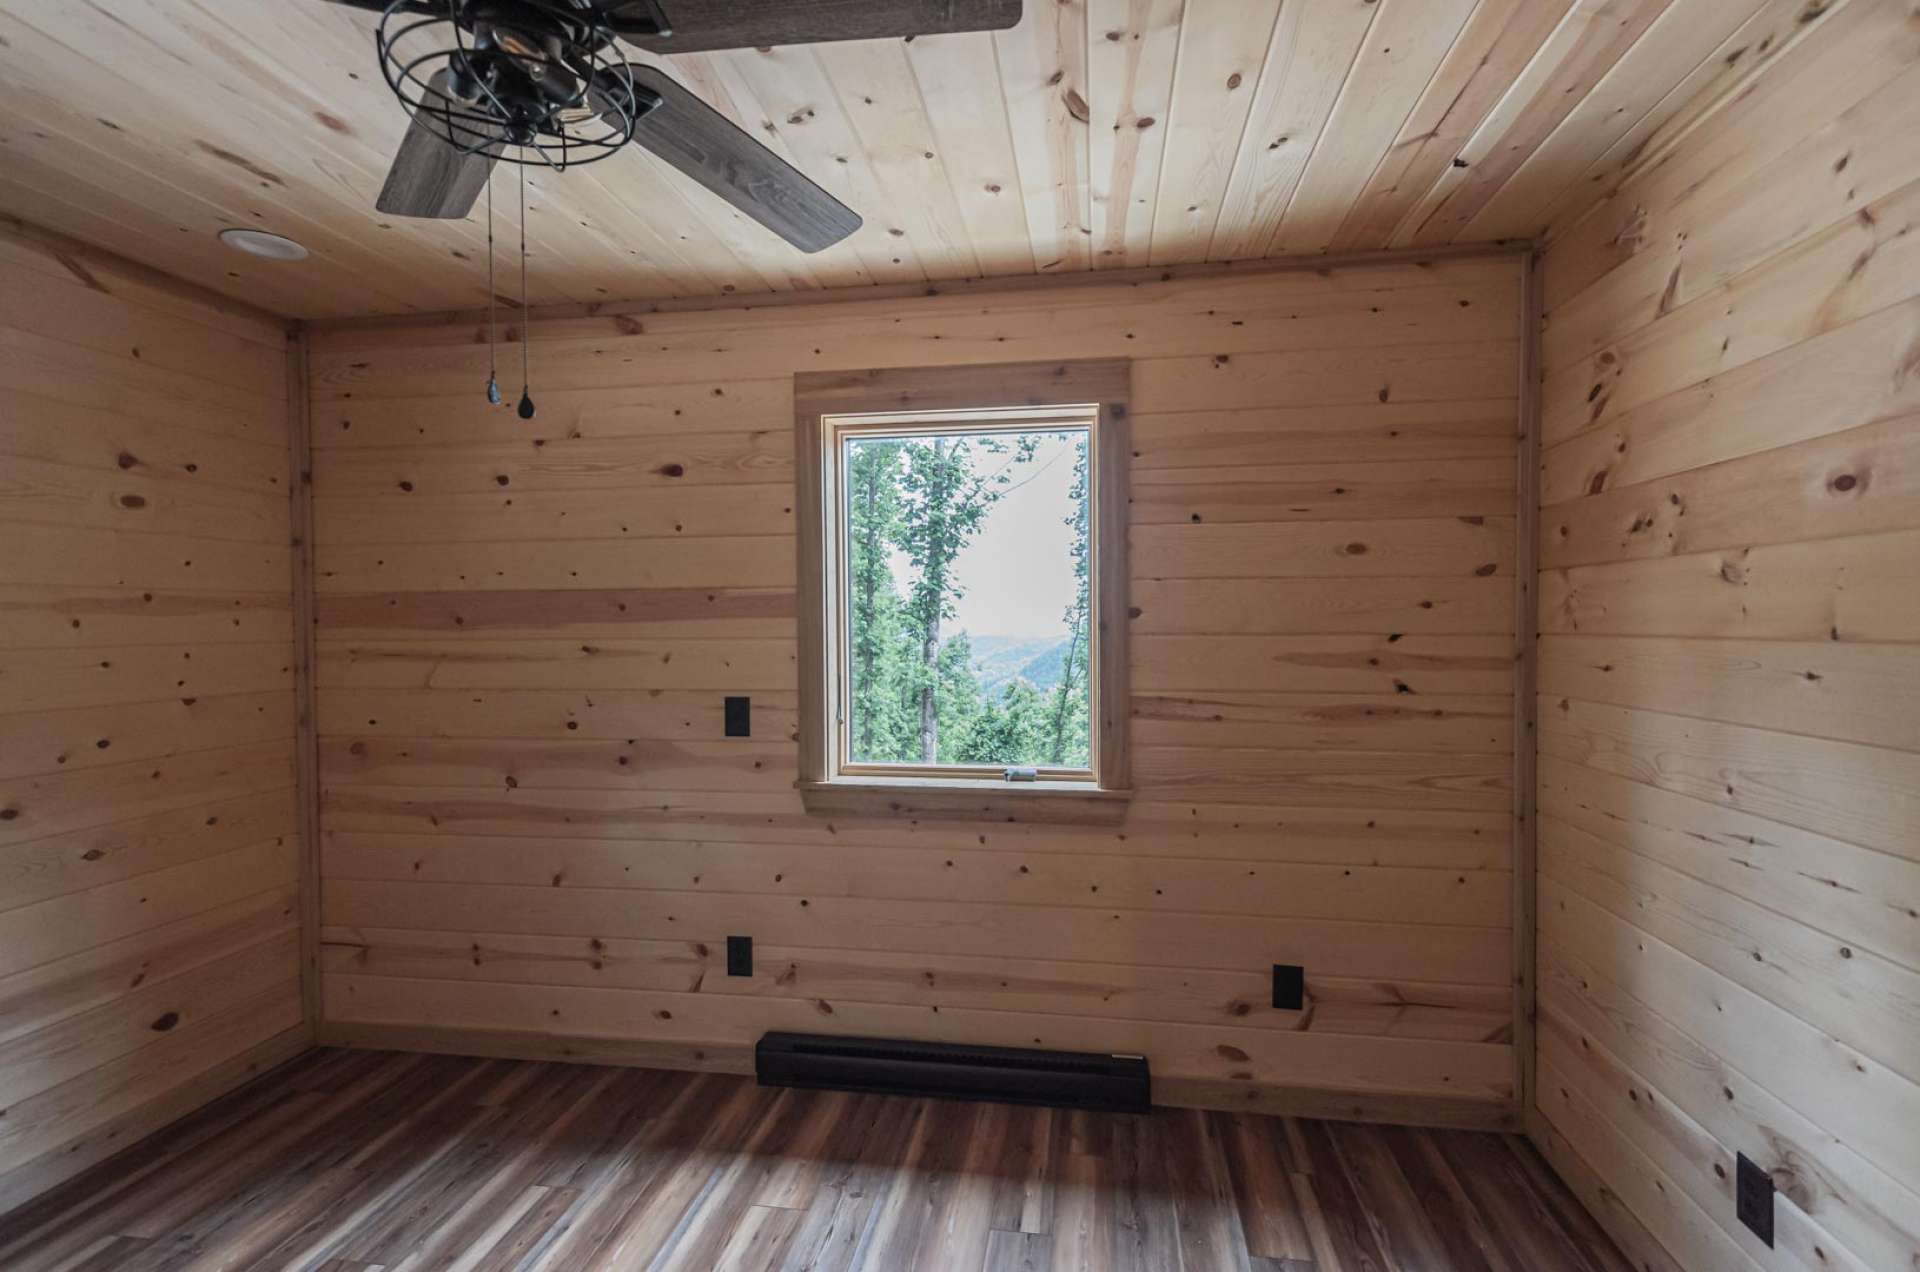 The master bedroom features a private master bath and access to the patio shared by guest cabin.